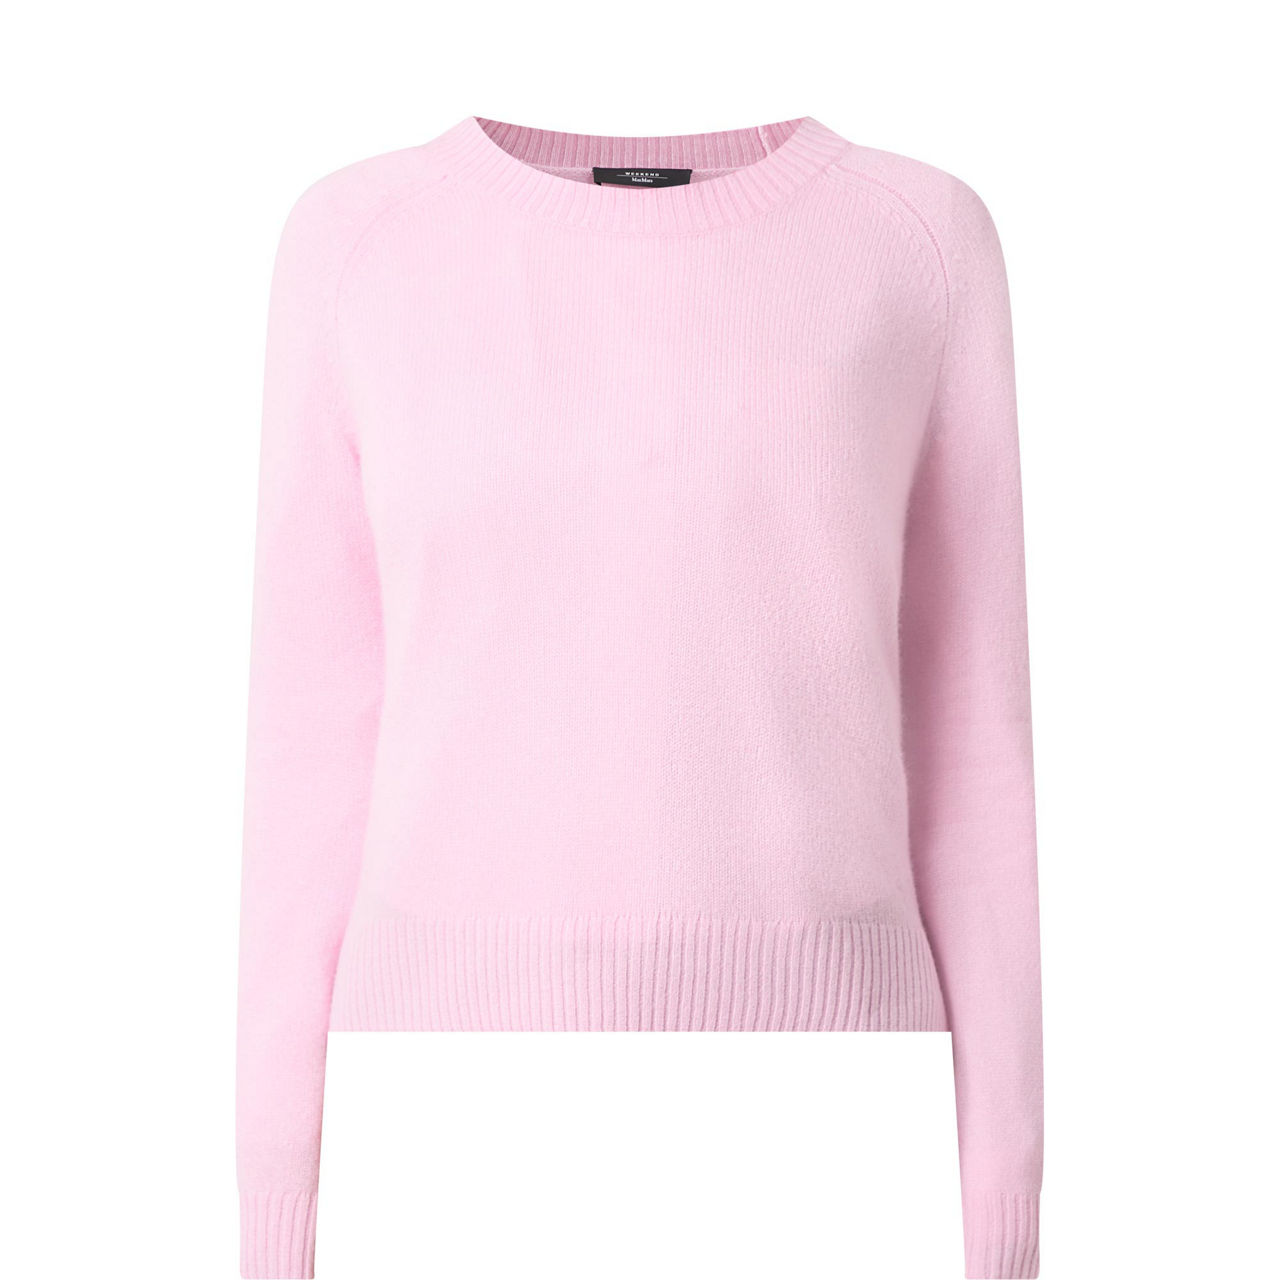 Crewneck Sweater for Women Floral Graphic Knitted Trendy Pullover Long  Sleeve Casual Loose Jumper Tops Comfort Soft Sweaters Cheap Stuff Under 50  Cents (Hot Pink,S) at  Women's Clothing store